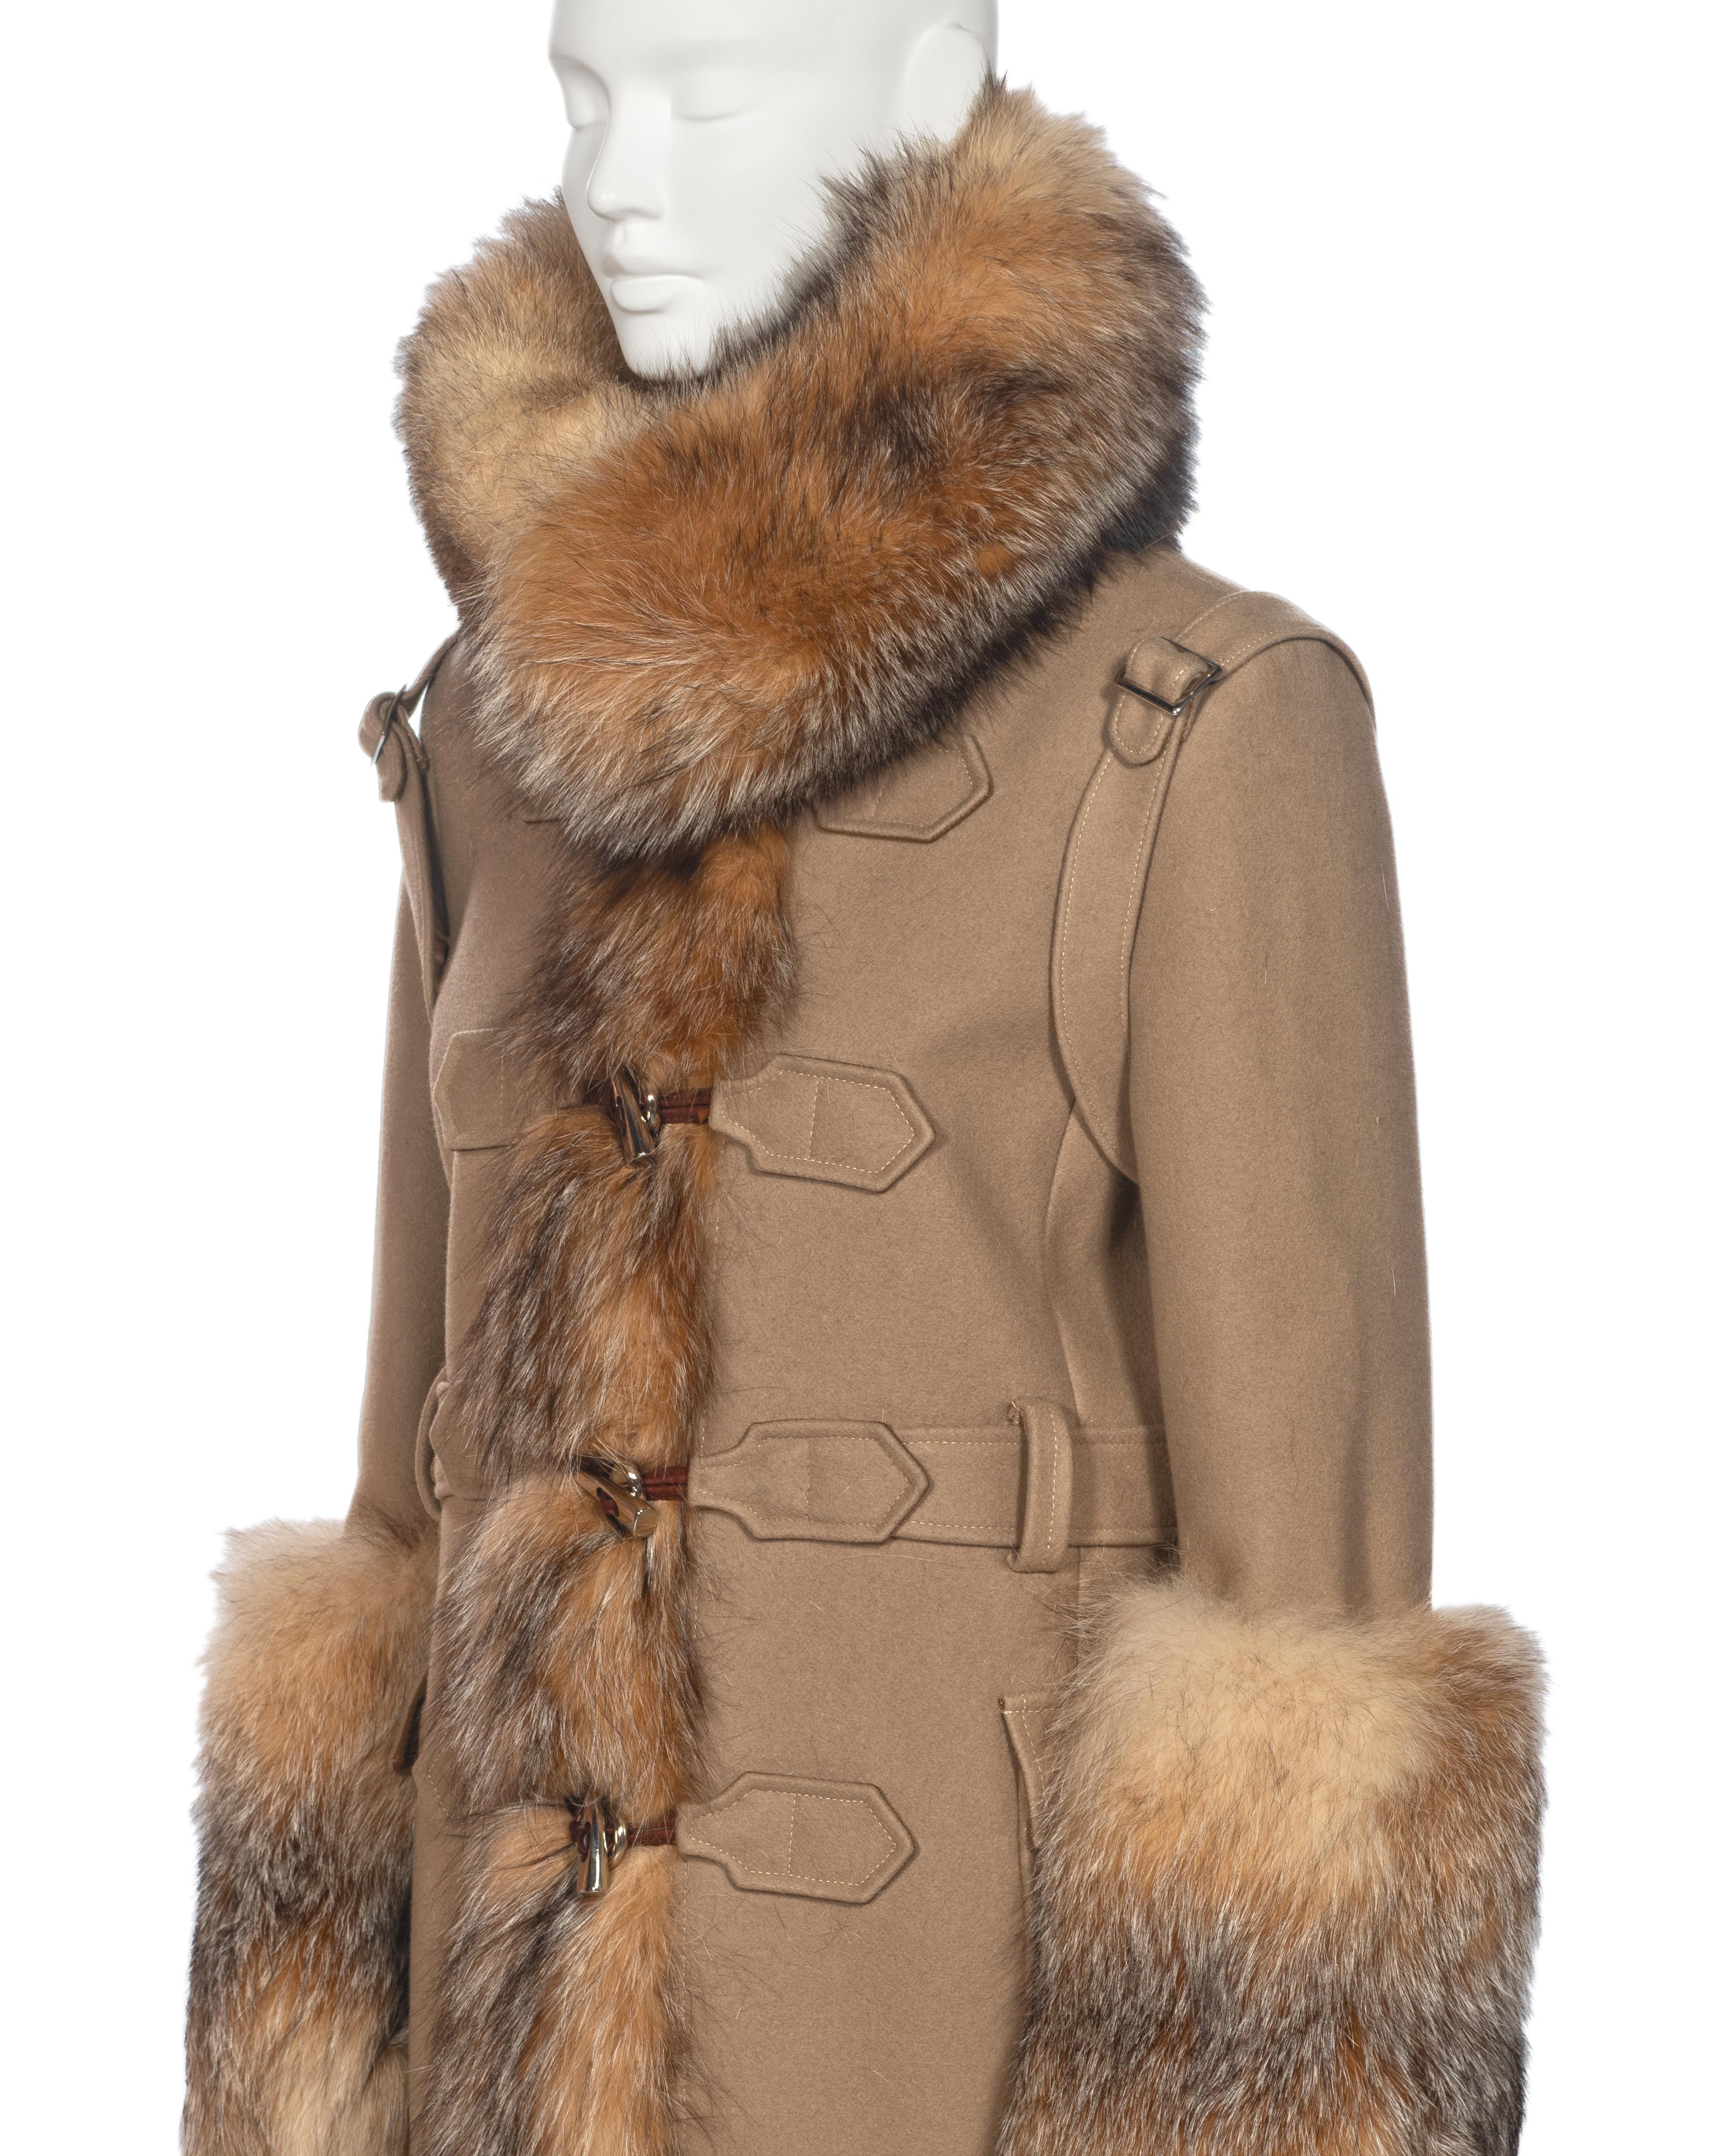 Balenciaga by Nicolas Ghesquière Fur-Trimmed Felted Wool Duffle Coat, fw 2005 For Sale 13